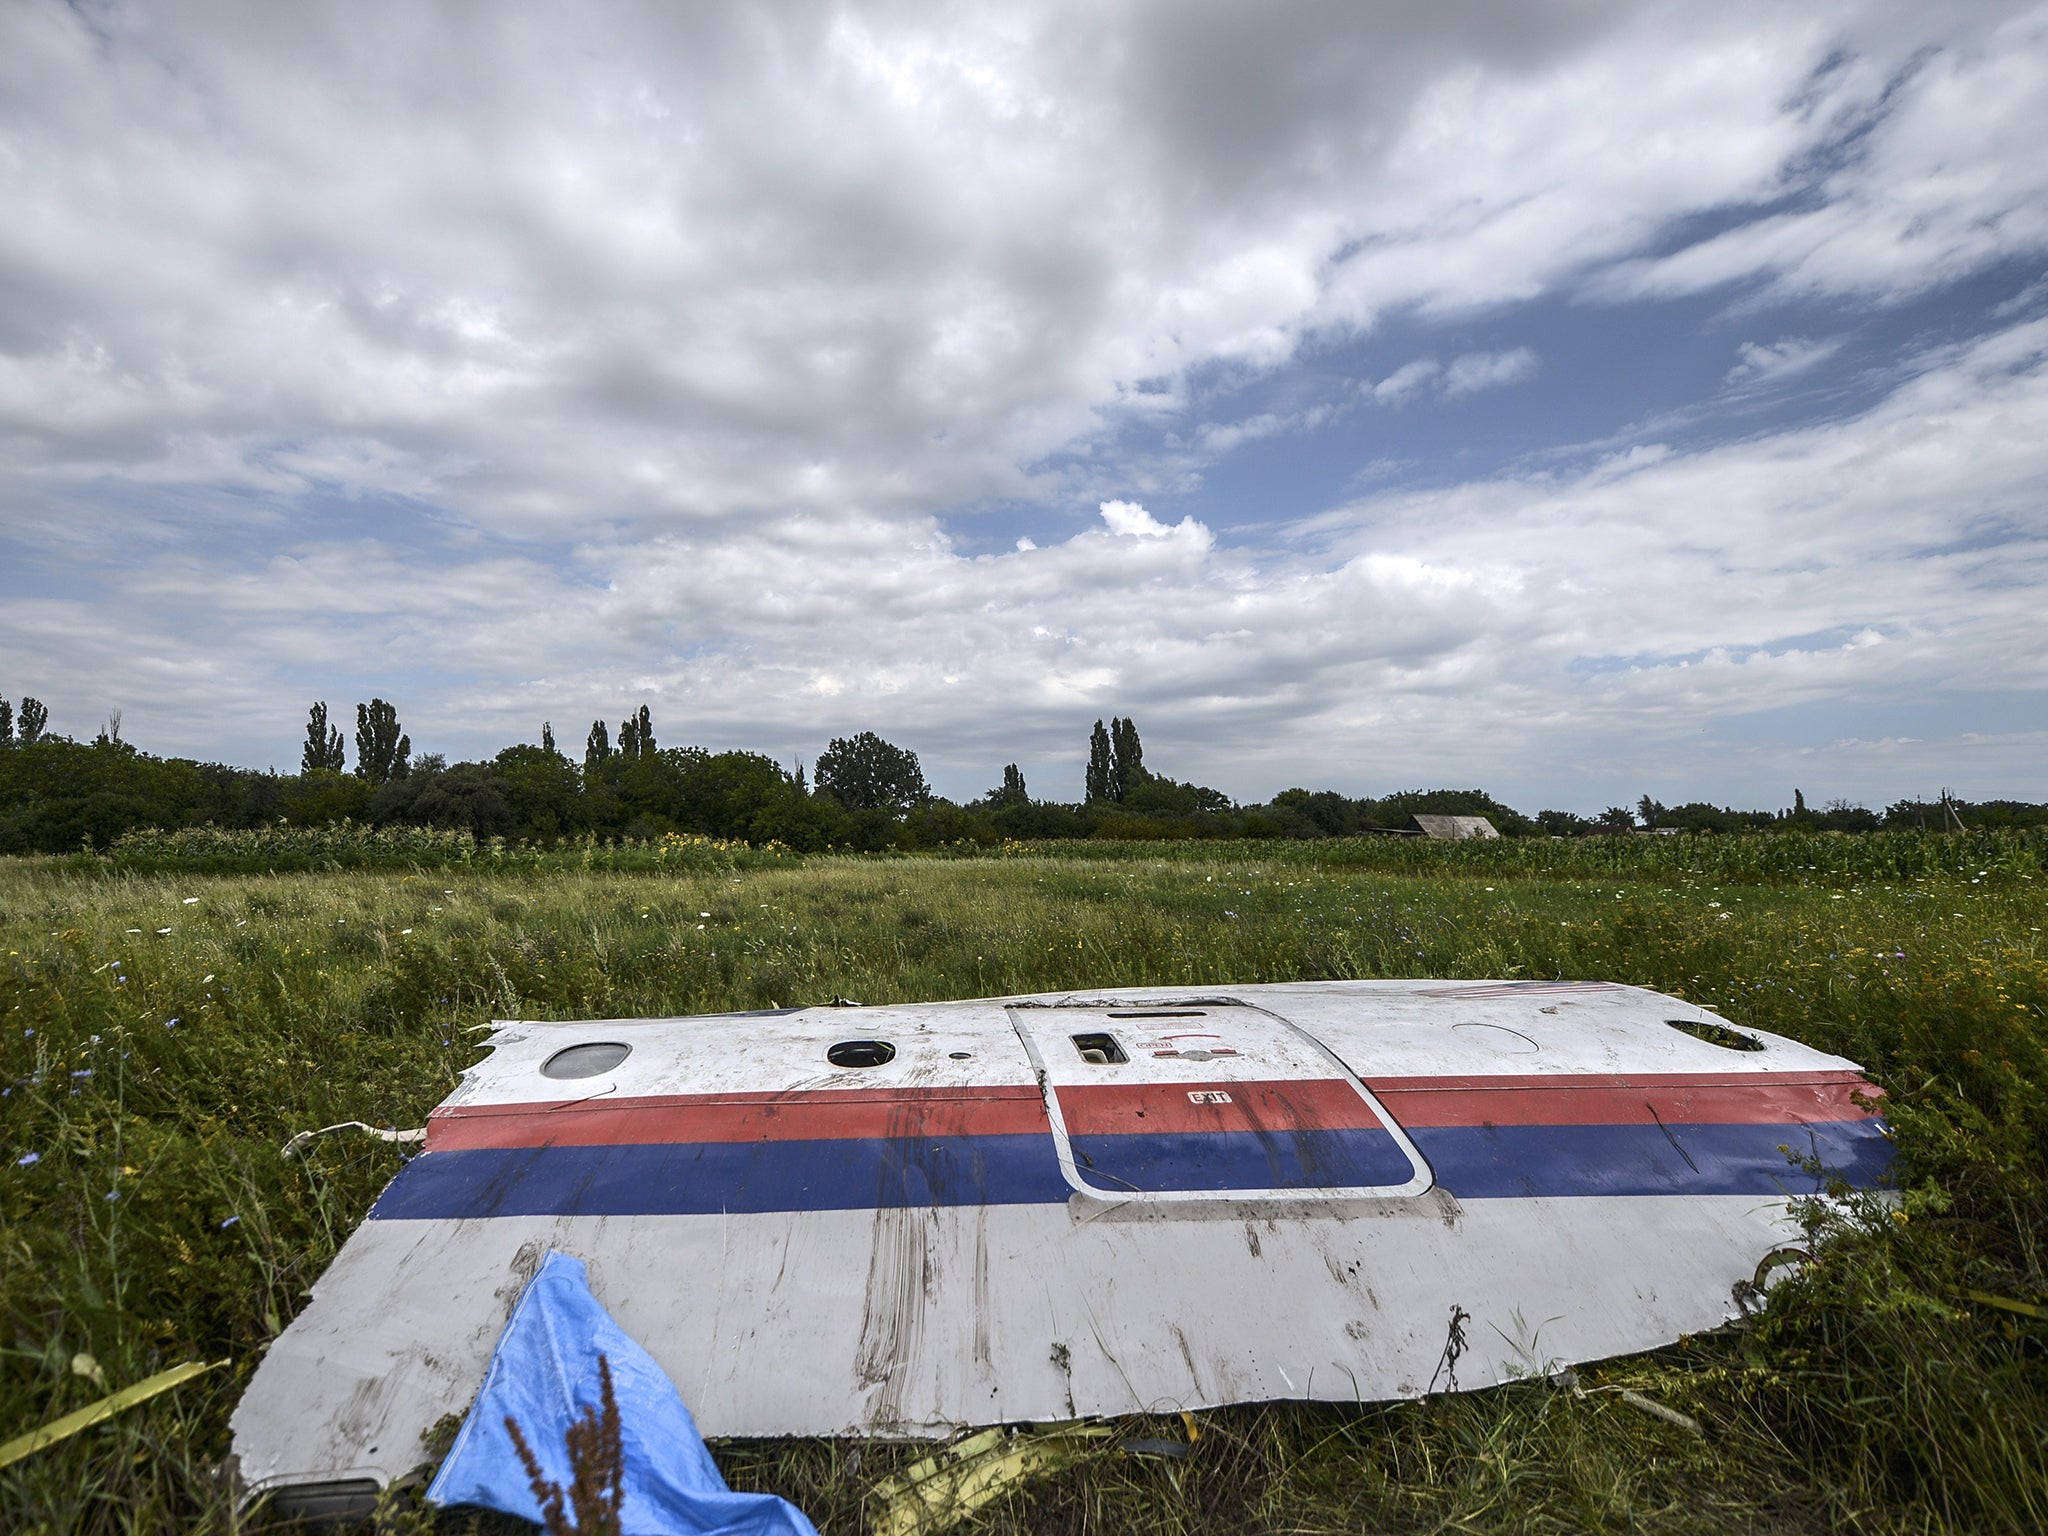 A piece of the wreckage of the Malaysia Airlines flight MH17 in Donetsk